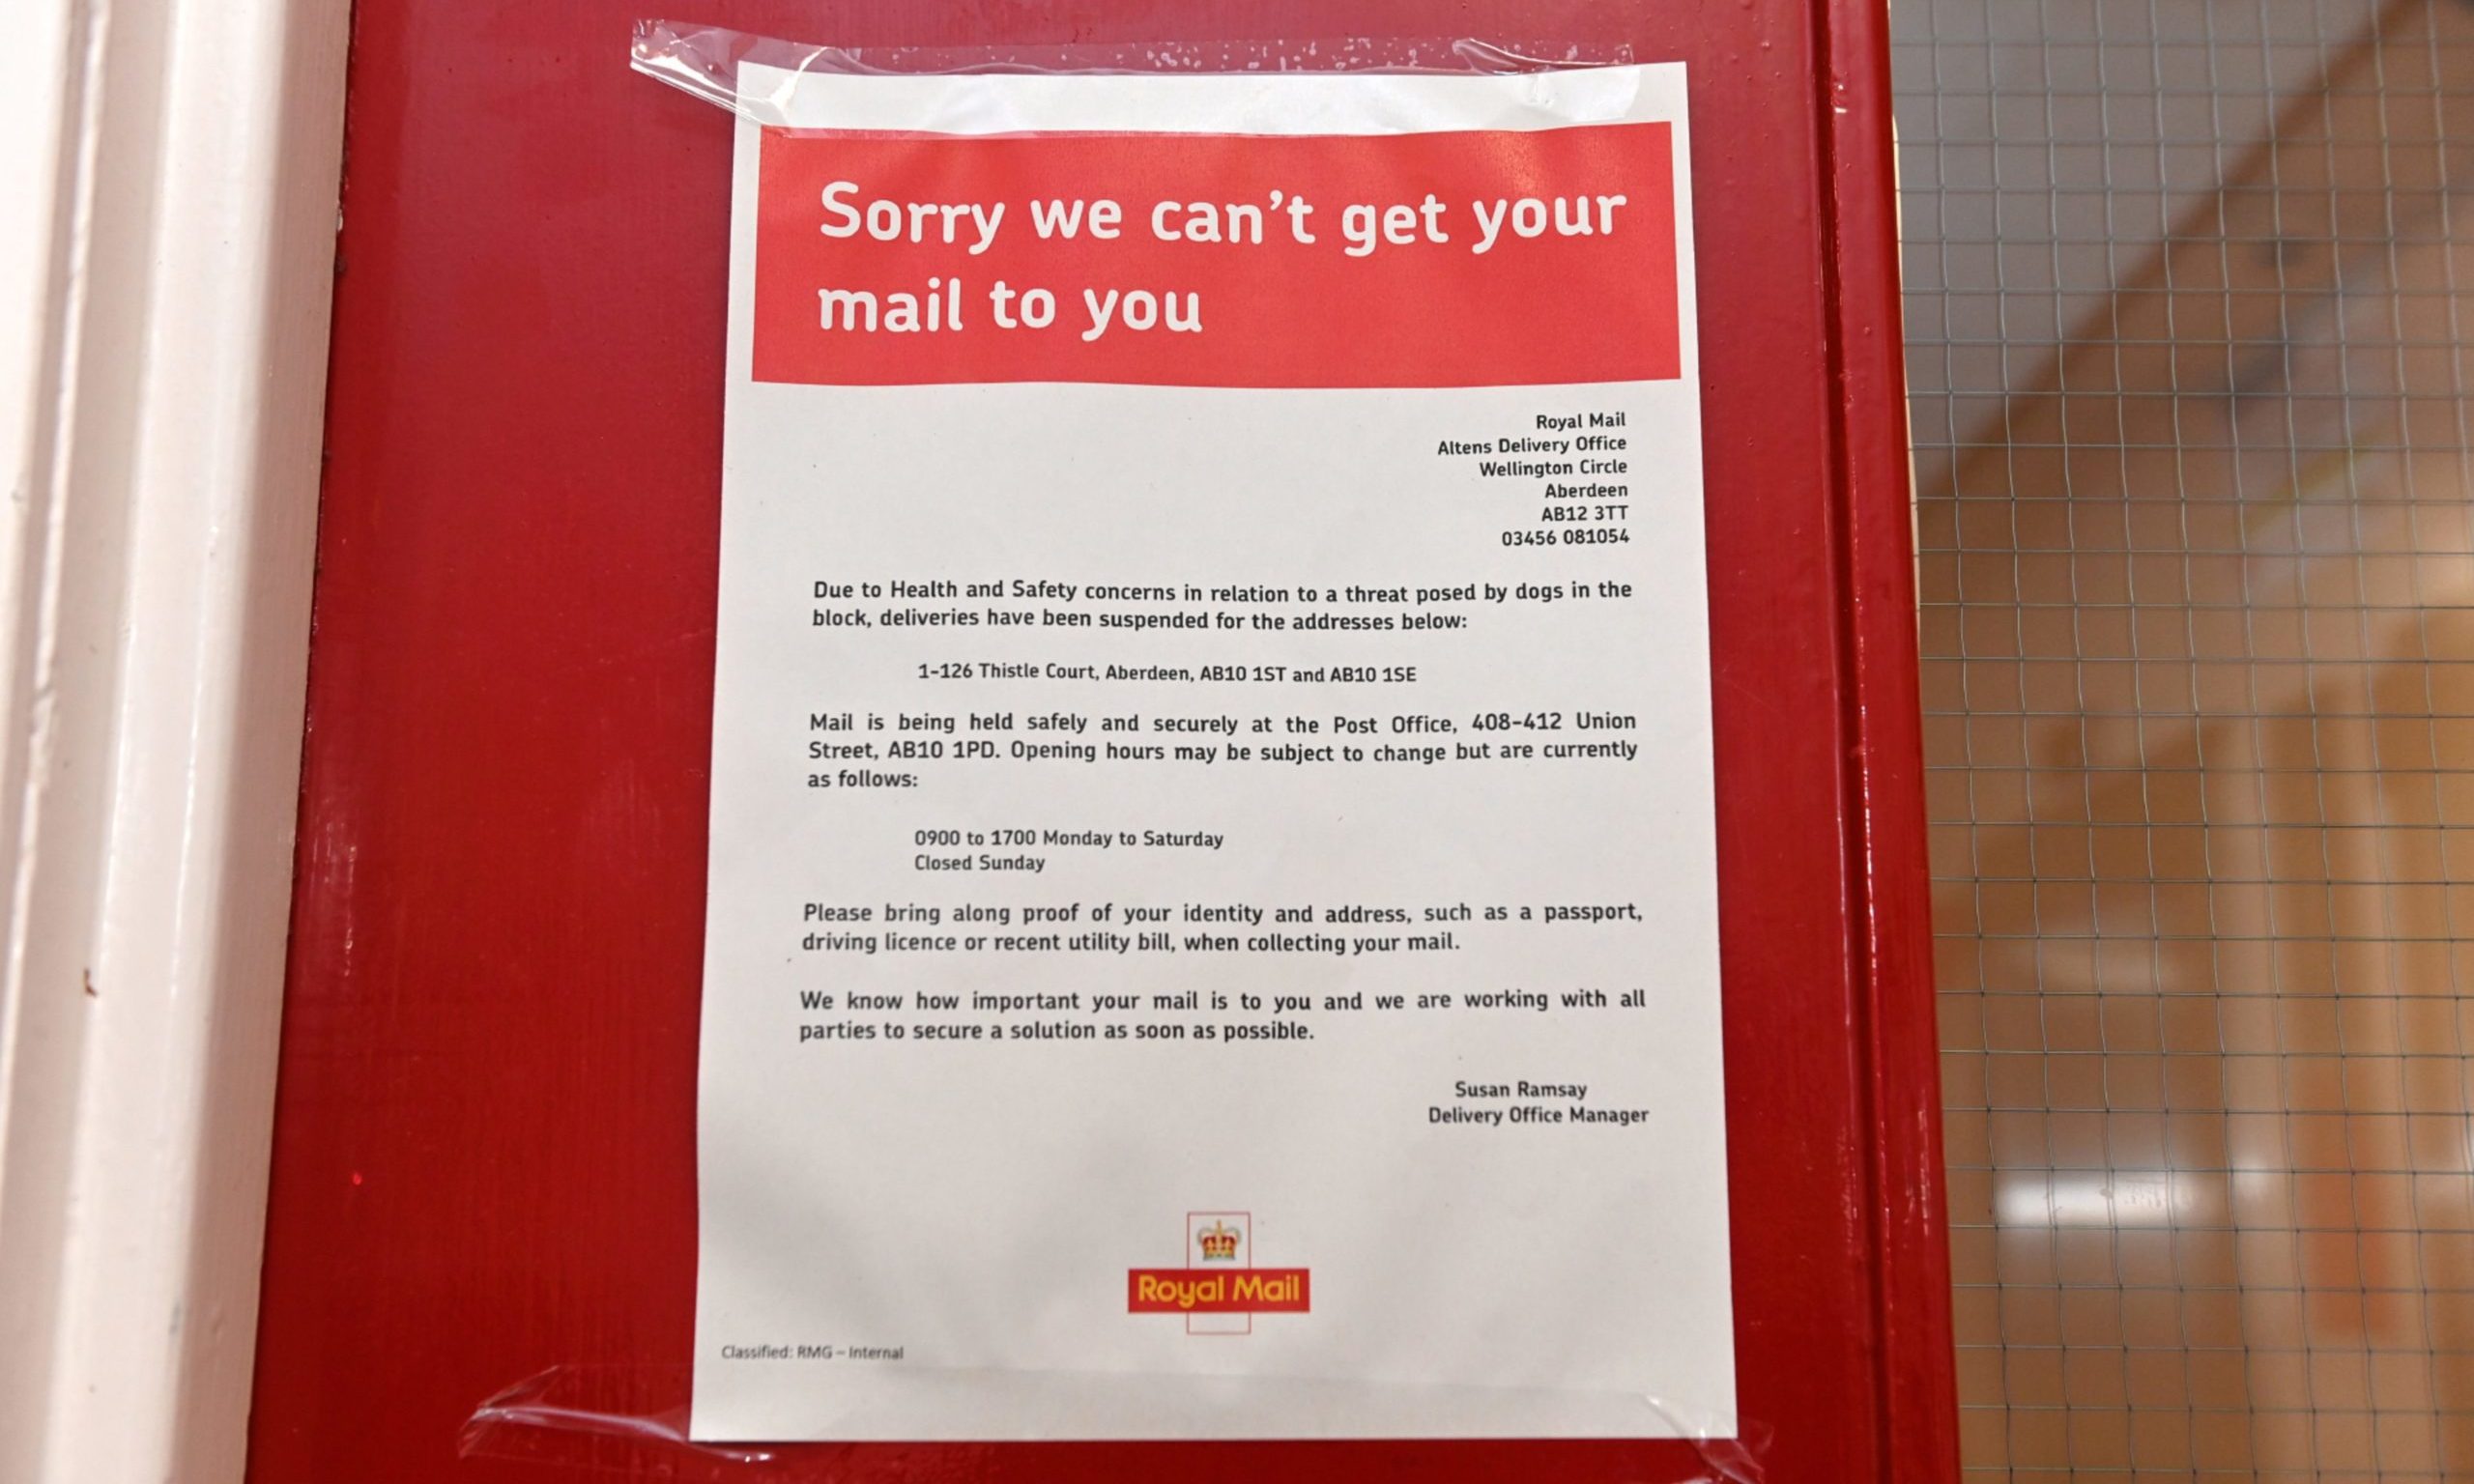 A notice explaining the decision to halt postal deliveries into Thistle Court, Aberdeen, written by Susan Ramsay, manager of the Royal Mail Altens delivery office.